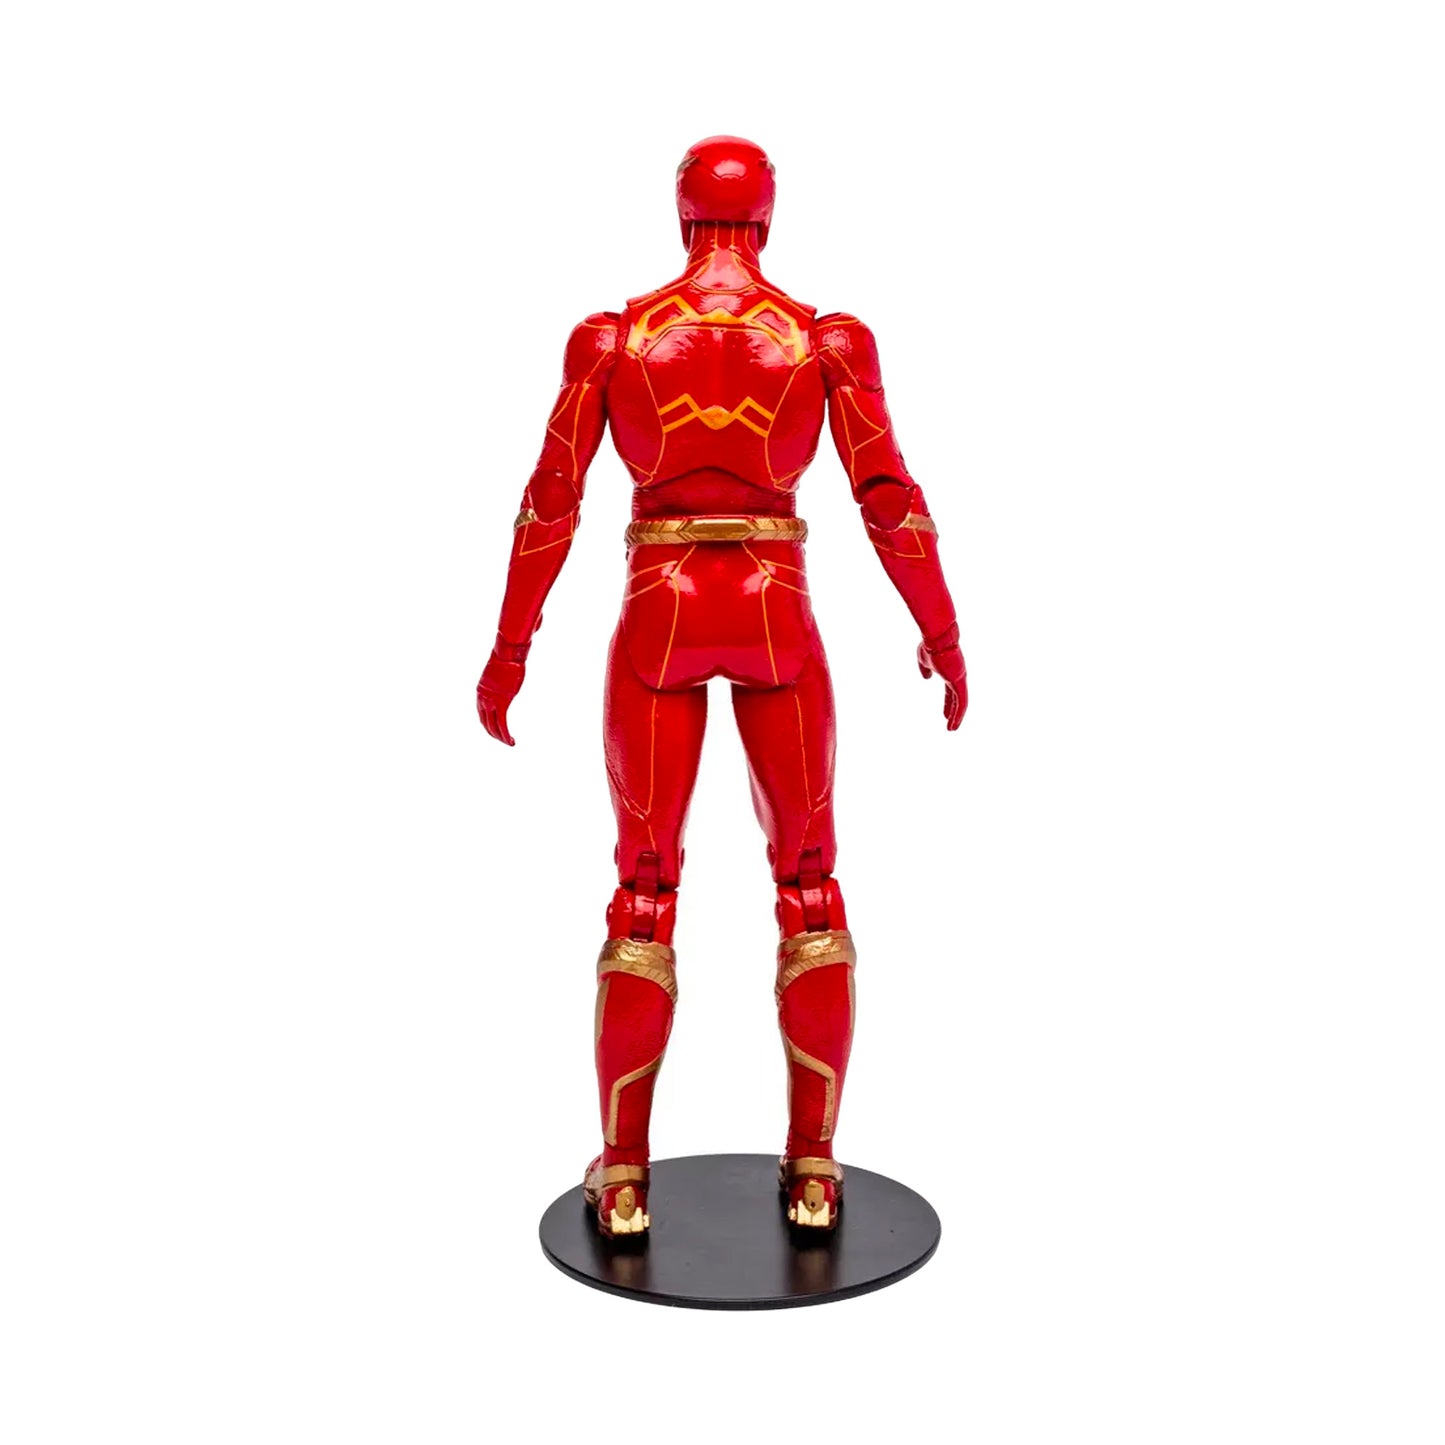 McFarlane Toys: DC Multiverse - The Flash 7" Tall Action Figure